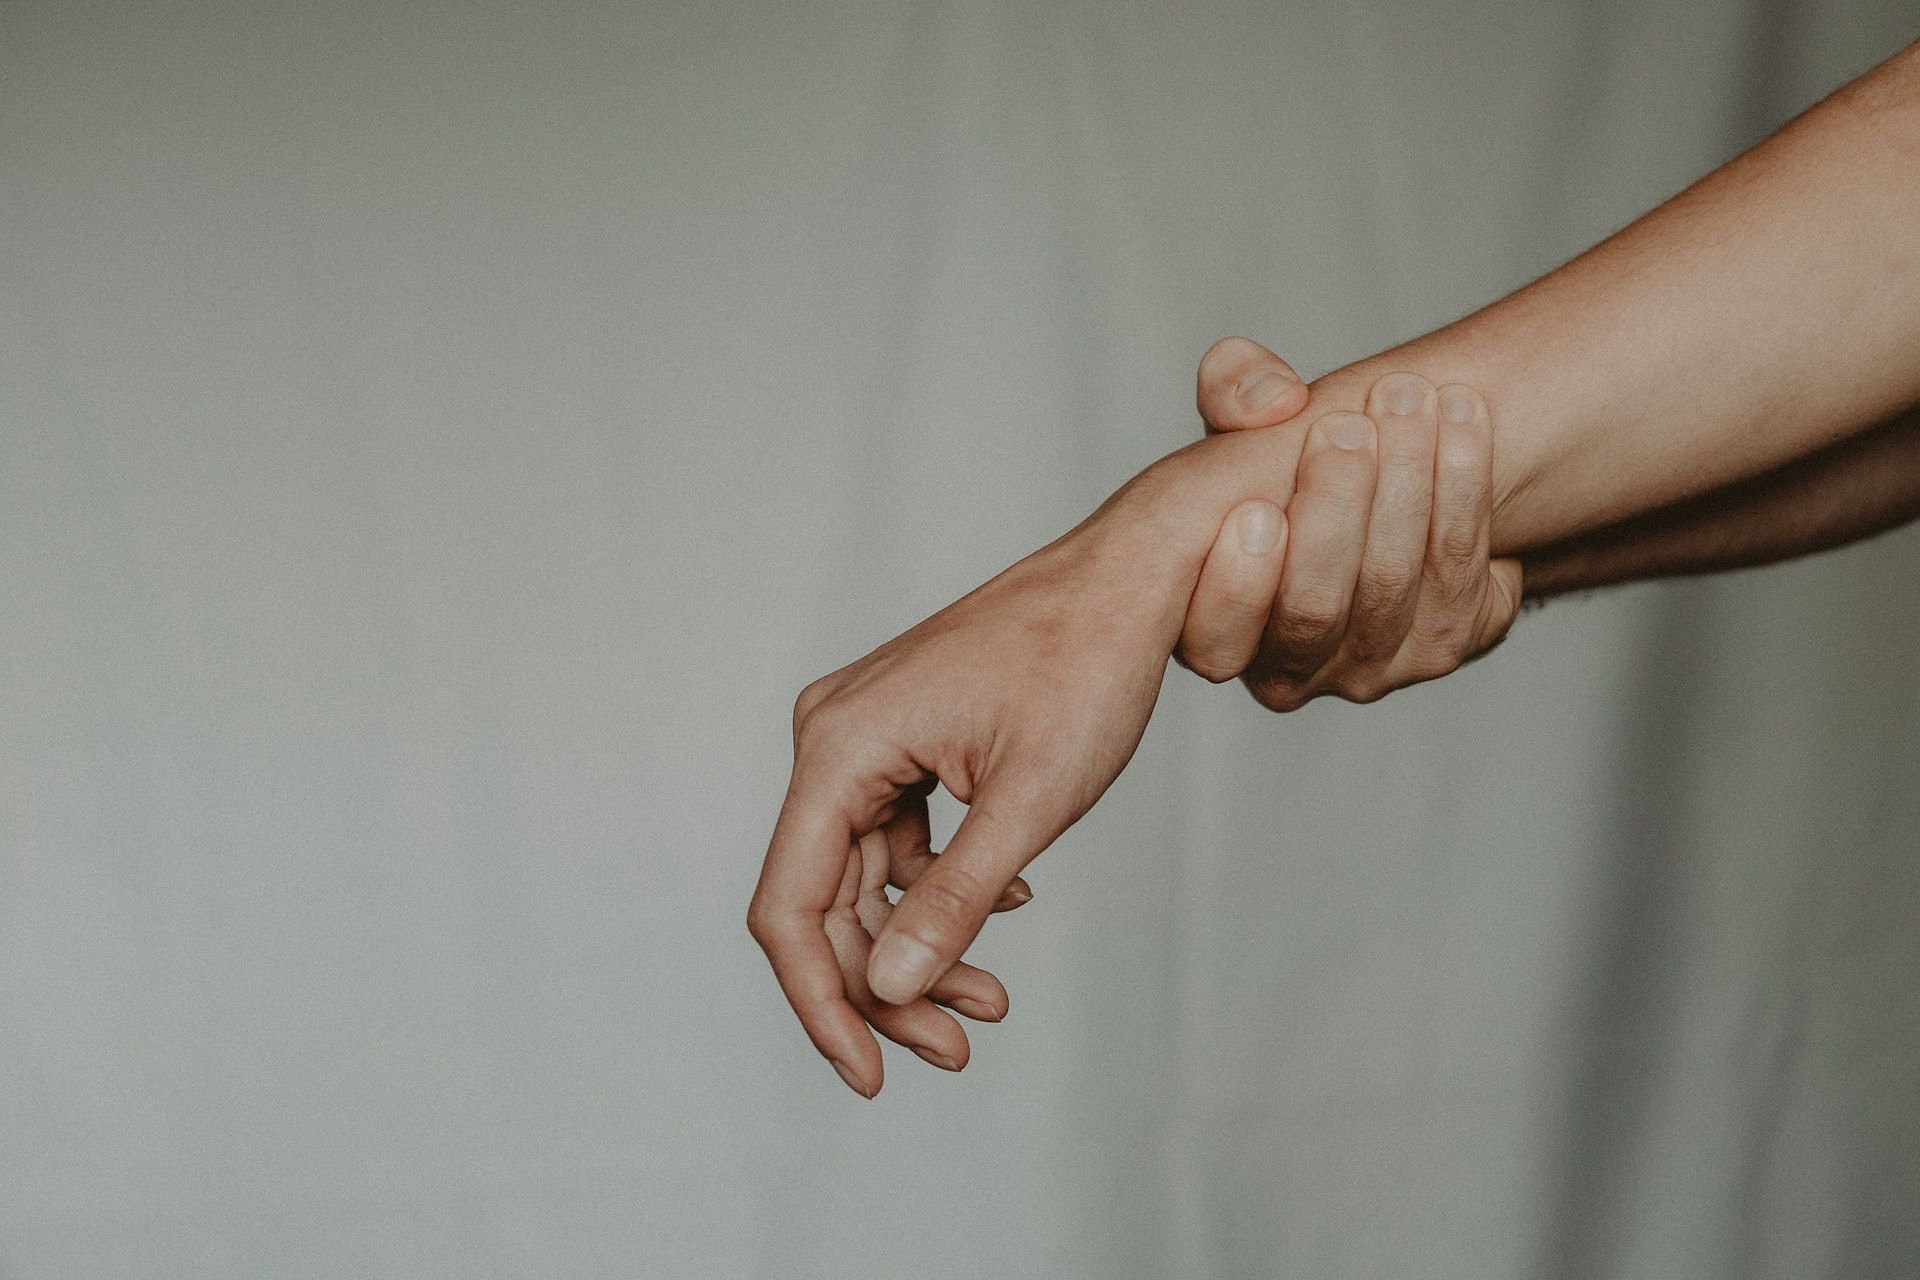 Carpal tunnel syndrome is a condition that leads to numbness, pain, and tingling sensation in the arm and hand. (Photo via Pexels/Anete Lusina)